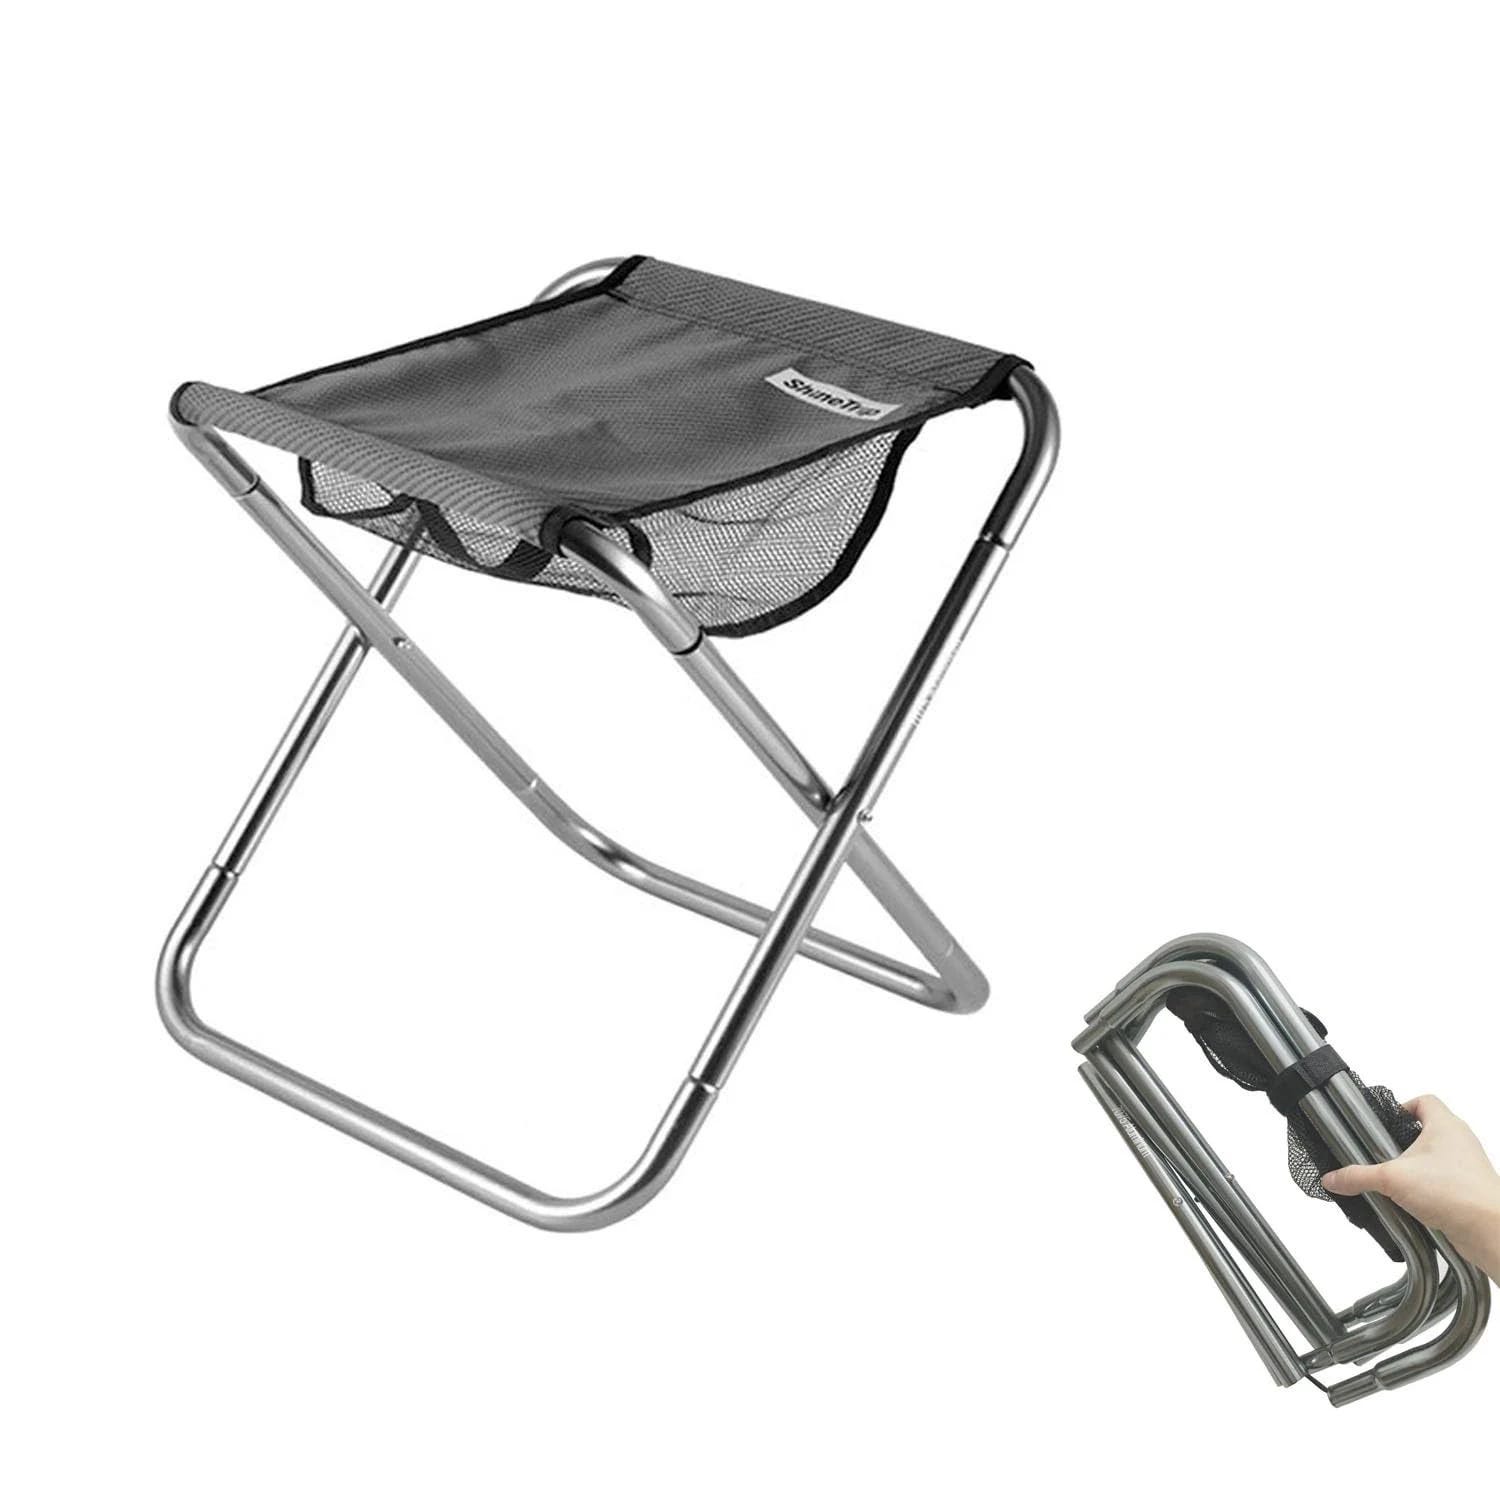 Portable Lightweight Folding Stool for Outdoor Activities | Image